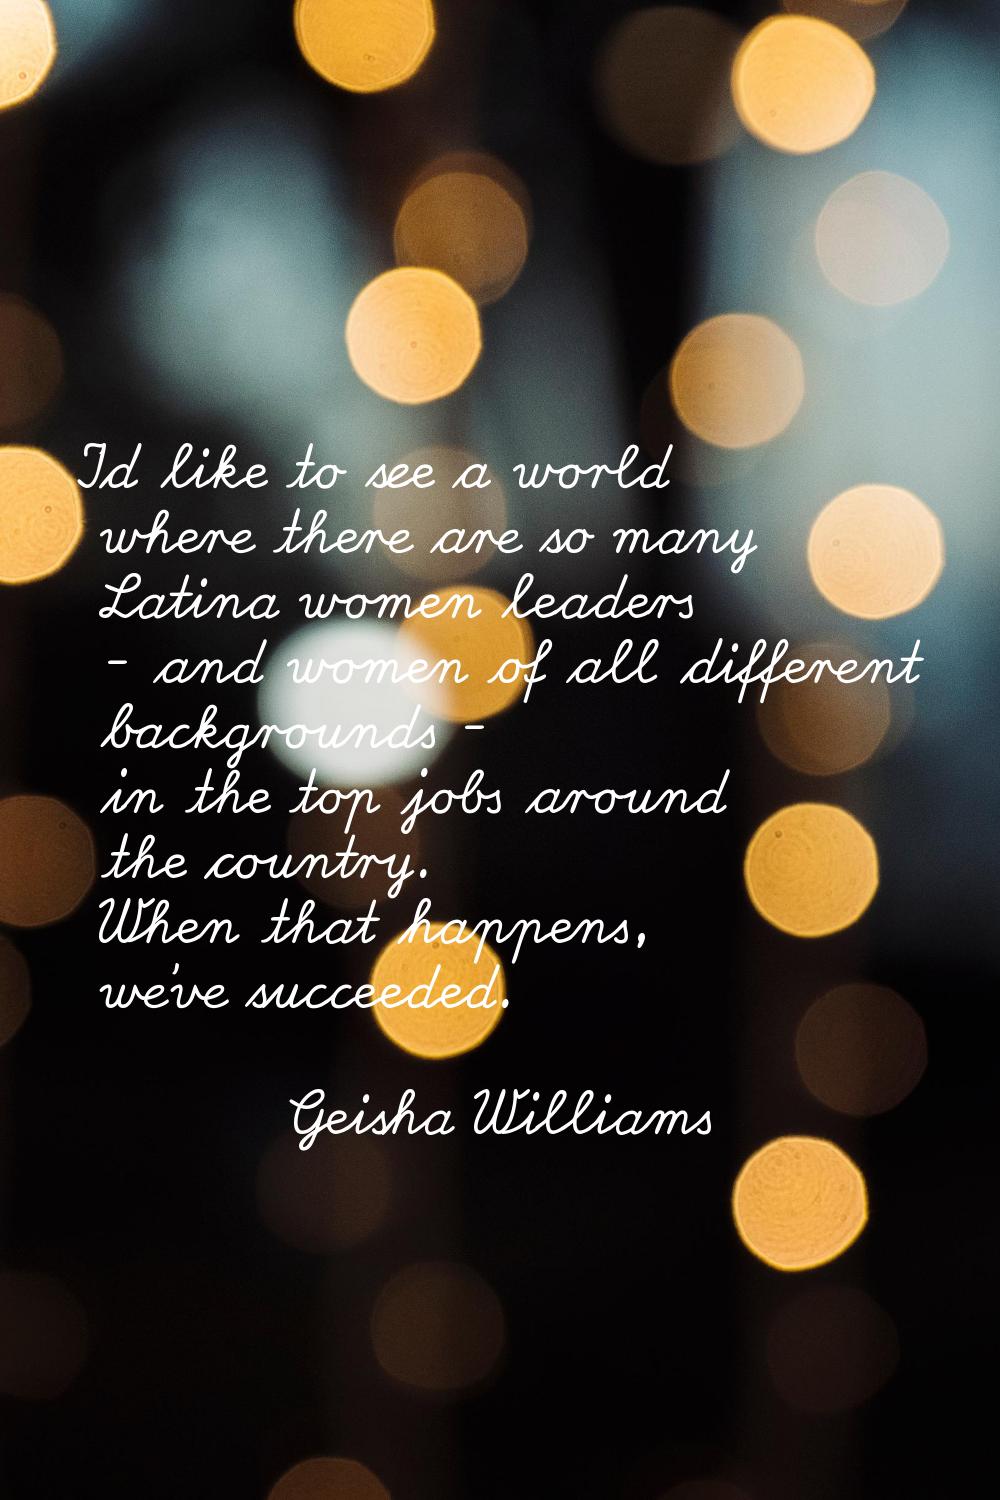 I'd like to see a world where there are so many Latina women leaders - and women of all different b